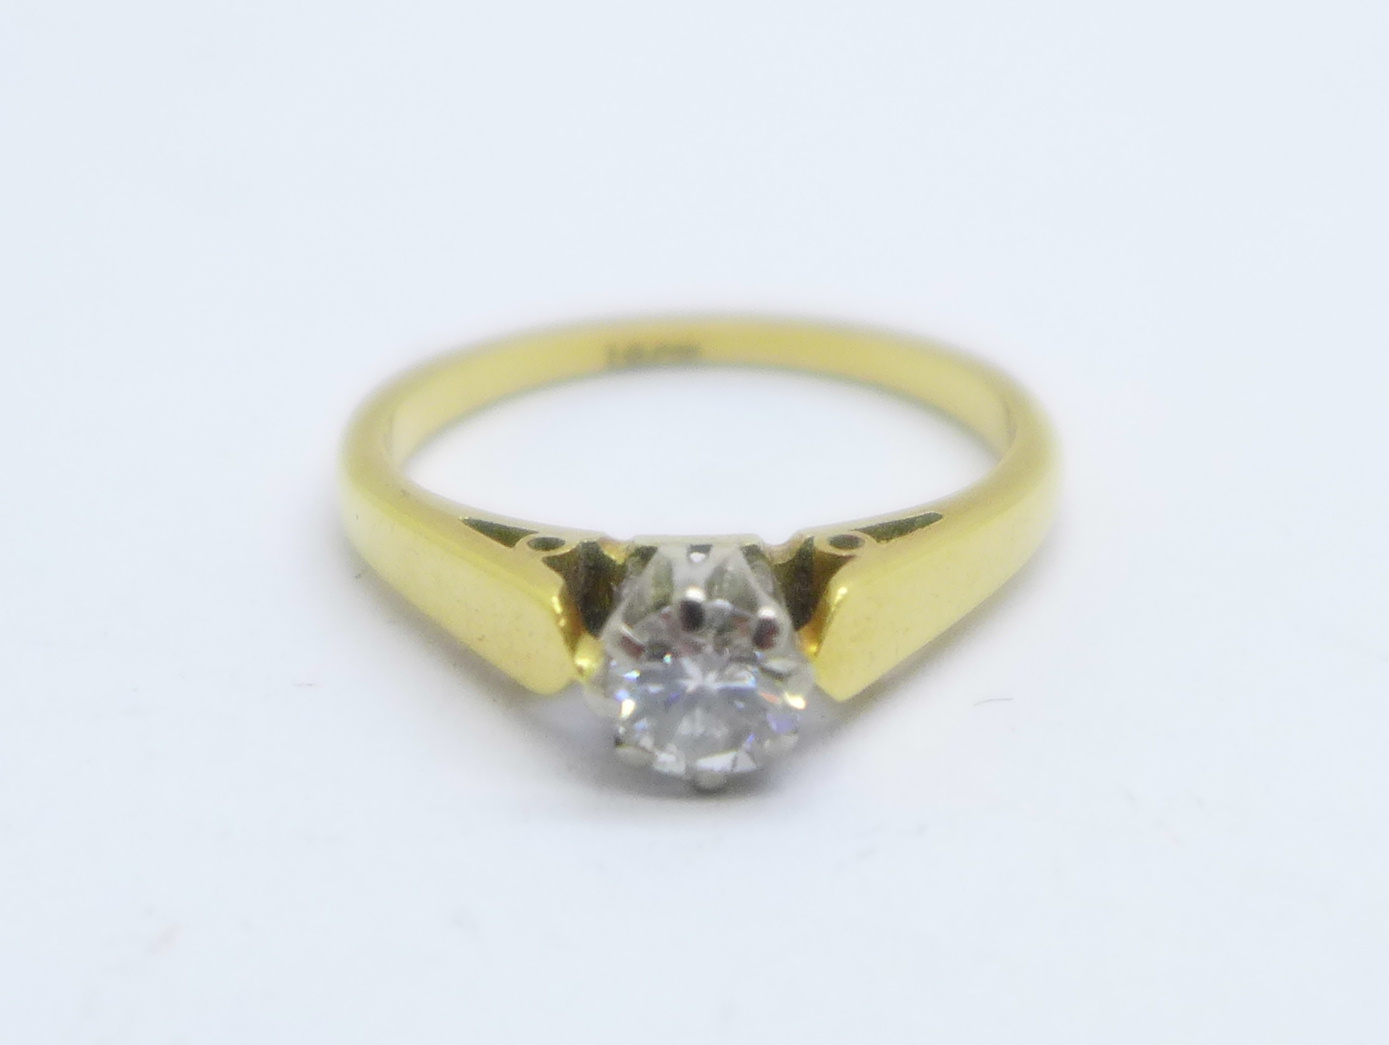 An 18ct gold and diamond solitaire ring, 2.7g, K, approximately 0.25carat weight